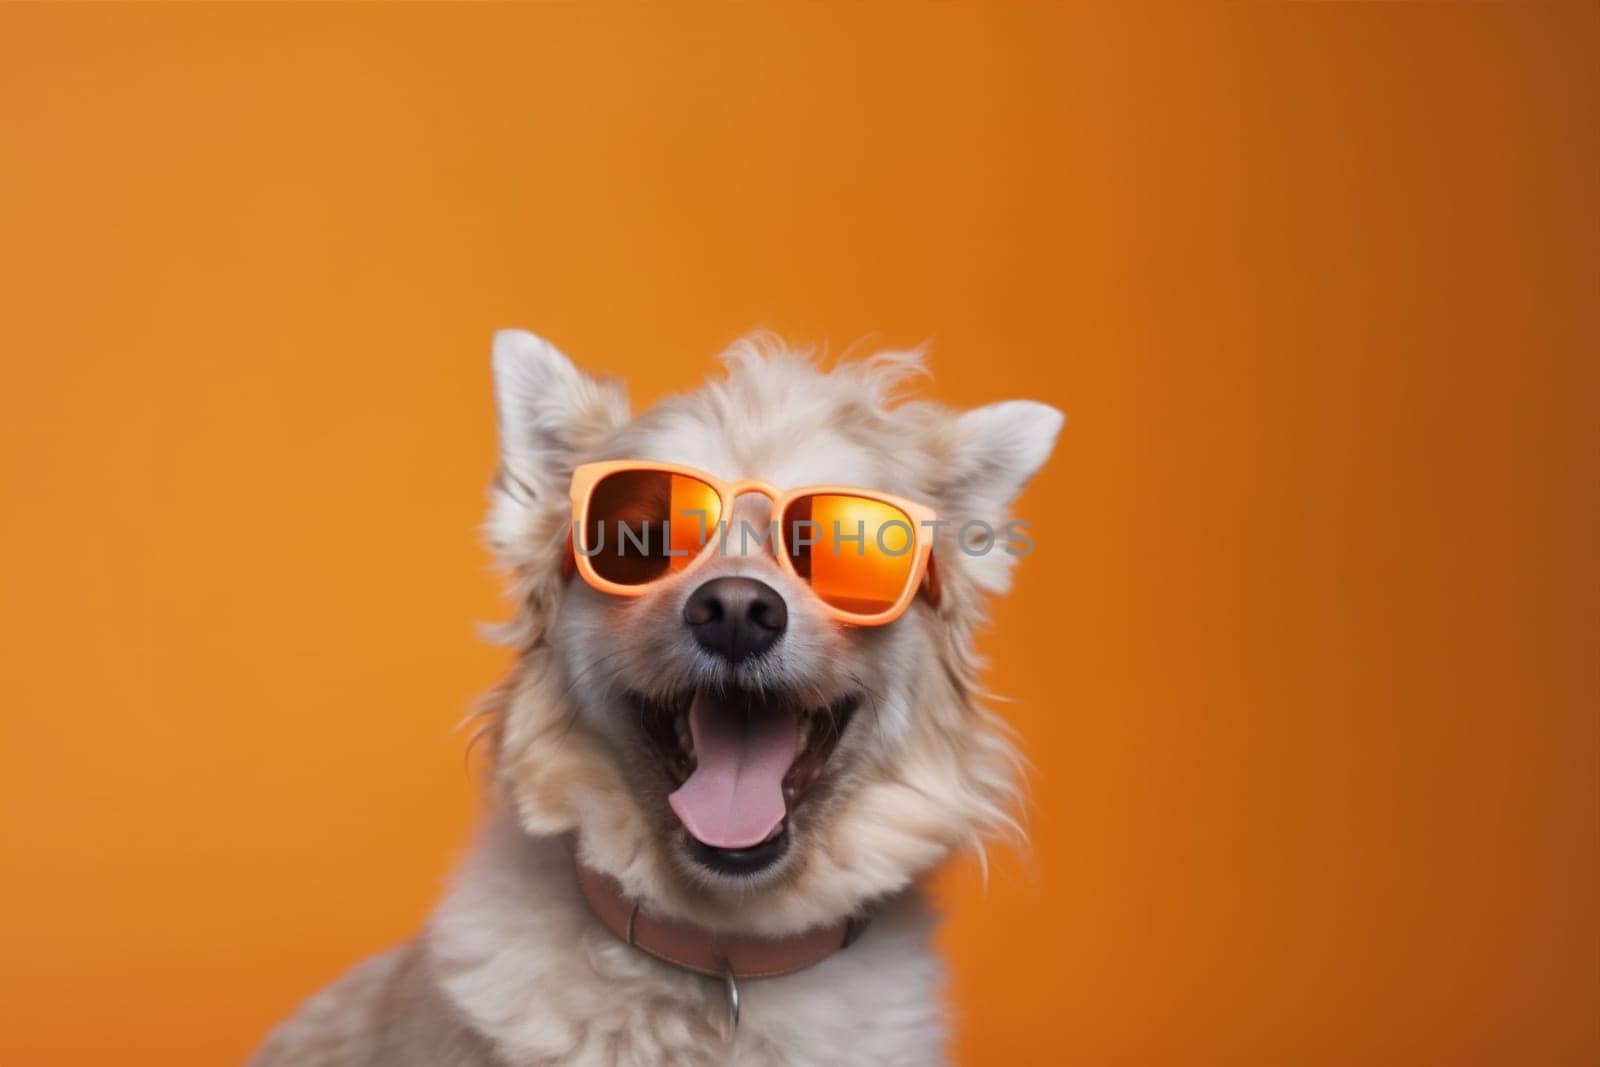 dog small smile party purebred isolated birthday background young puppy cute portrait trendy pet sunglasses adorable animal breed summer indoor cool funny. Generative AI.